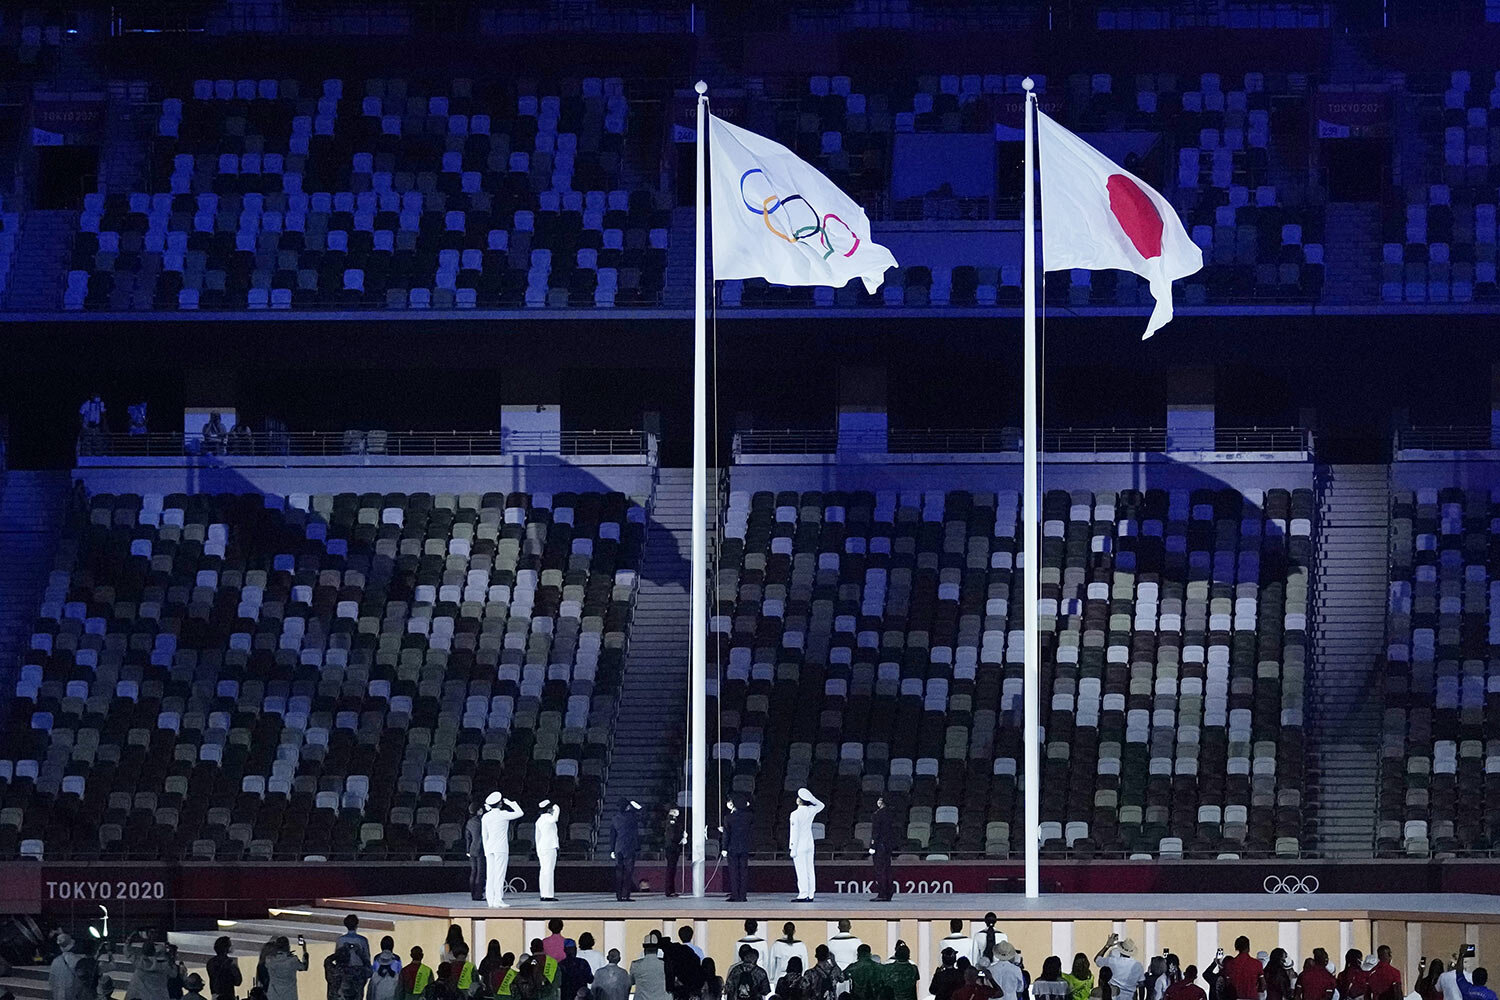  The Olympic flag is raised during the opening ceremony in the Olympic Stadium at the 2020 Summer Olympics, Friday, July 23, 2021, in Tokyo, Japan. (AP Photo/Kirsty Wigglesworth) 